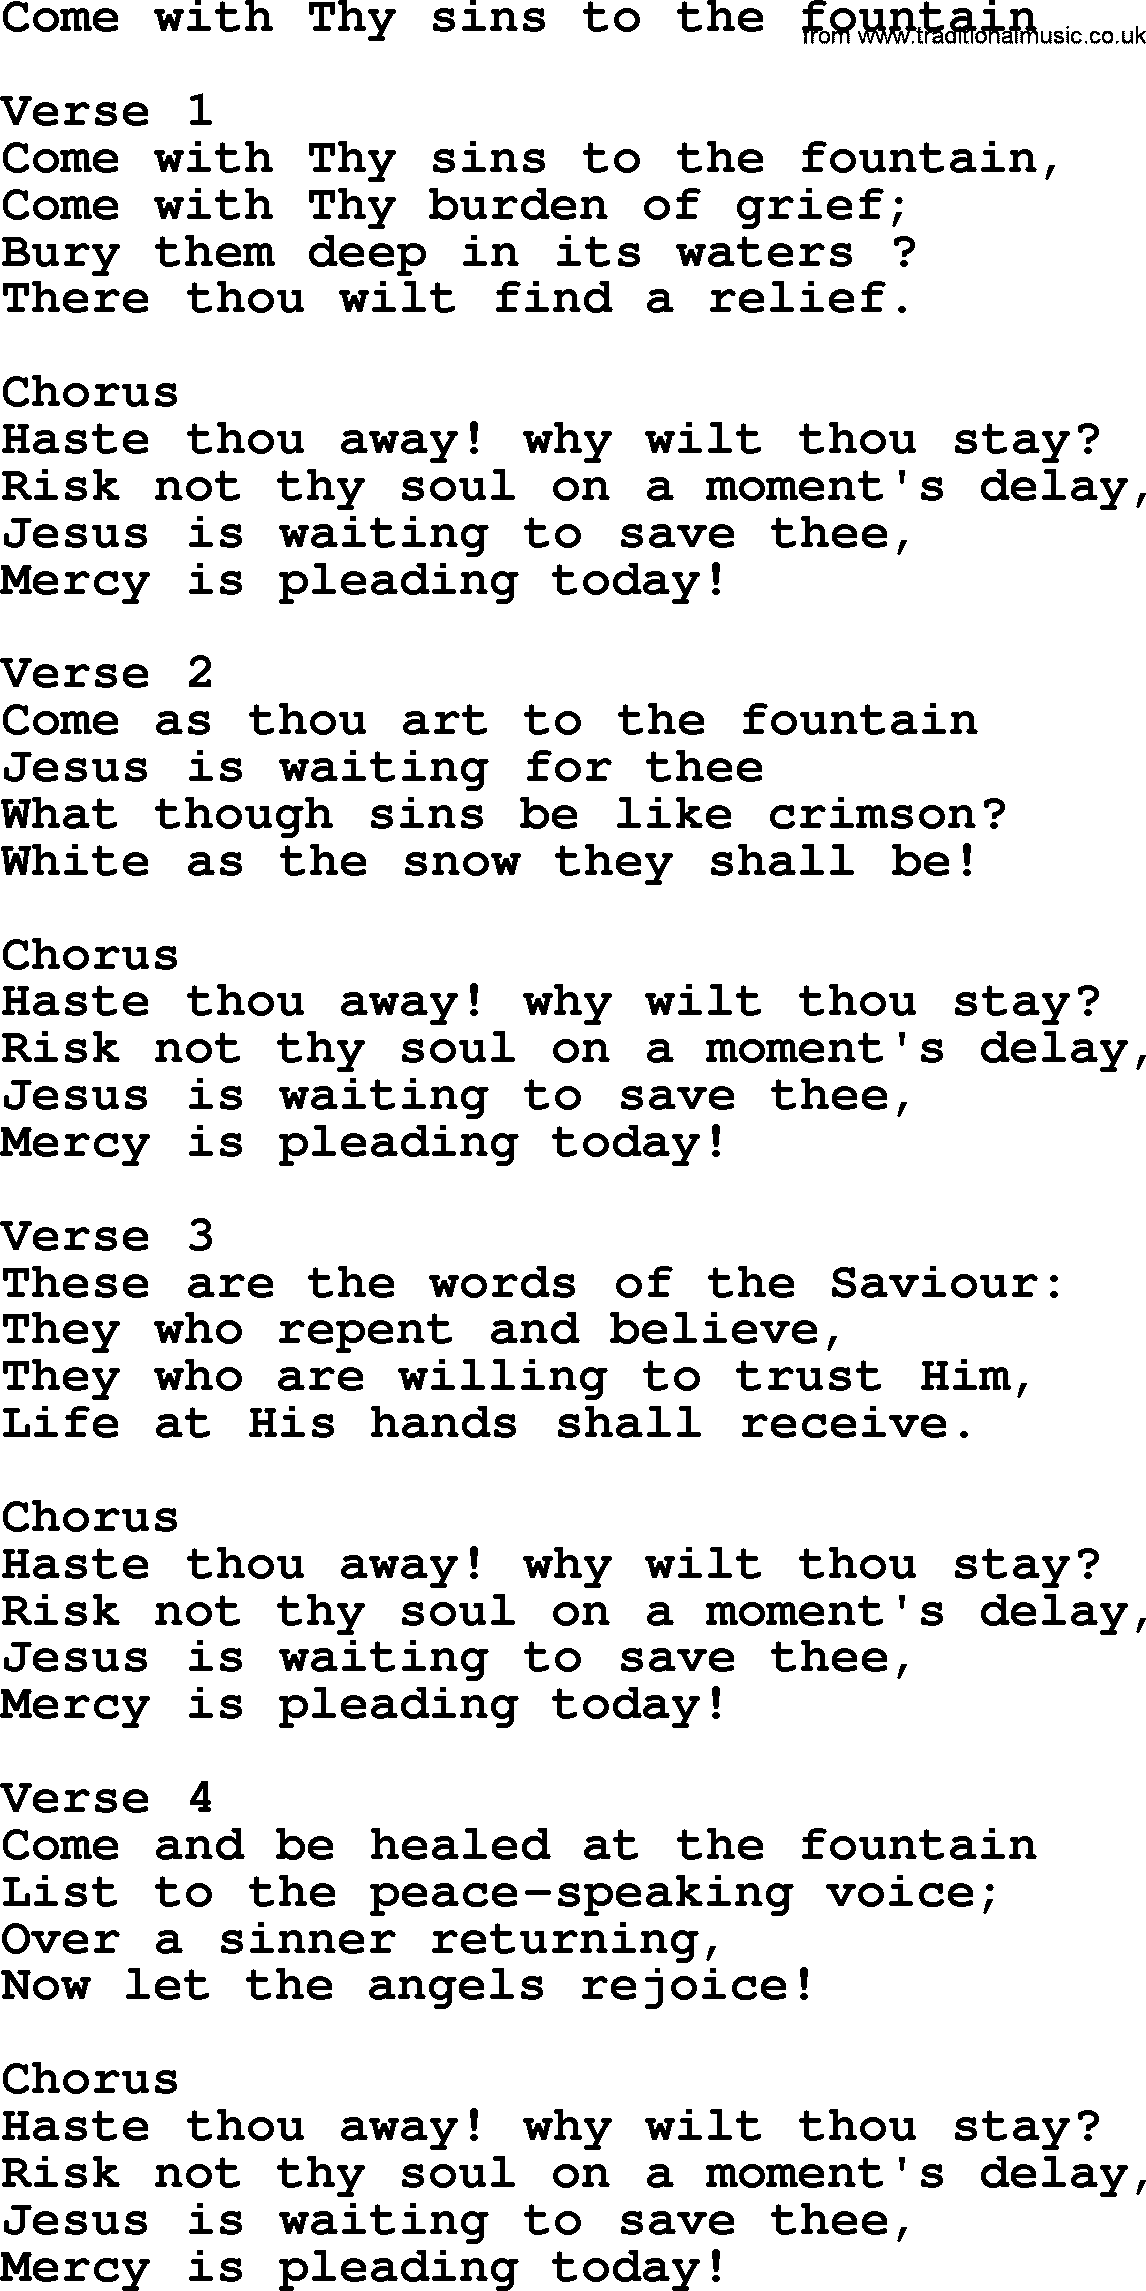 Apostolic and Pentecostal Hymns and Gospel Songs, Hymn: Come With Thy Sins To The Fountain, Christian lyrics and PDF